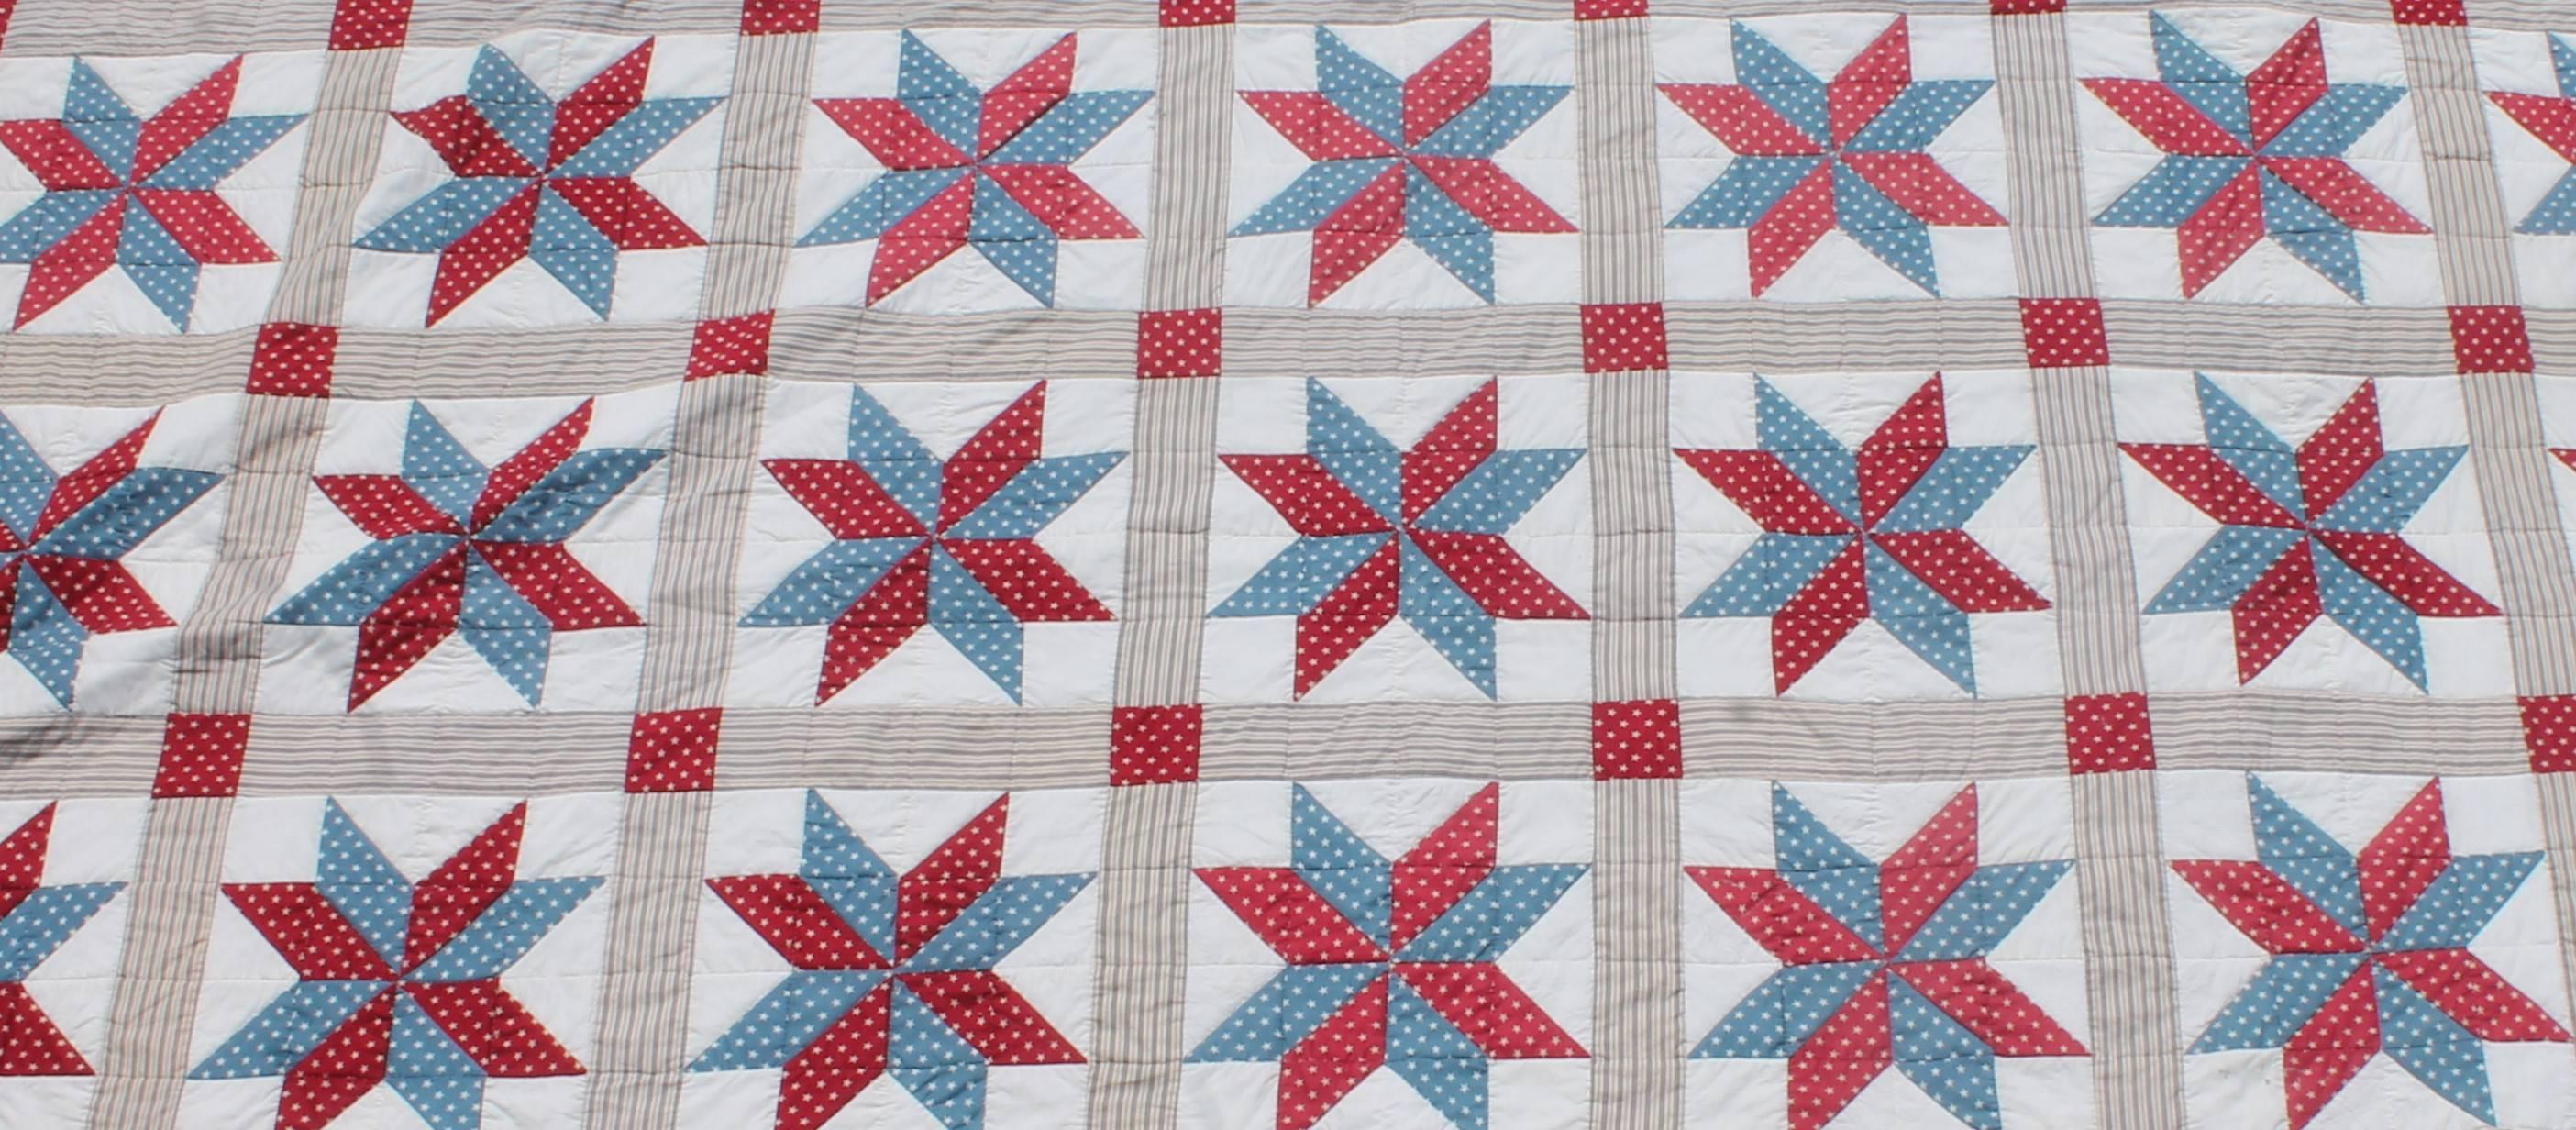 Other Patriotic Quilt Eight Point Stars